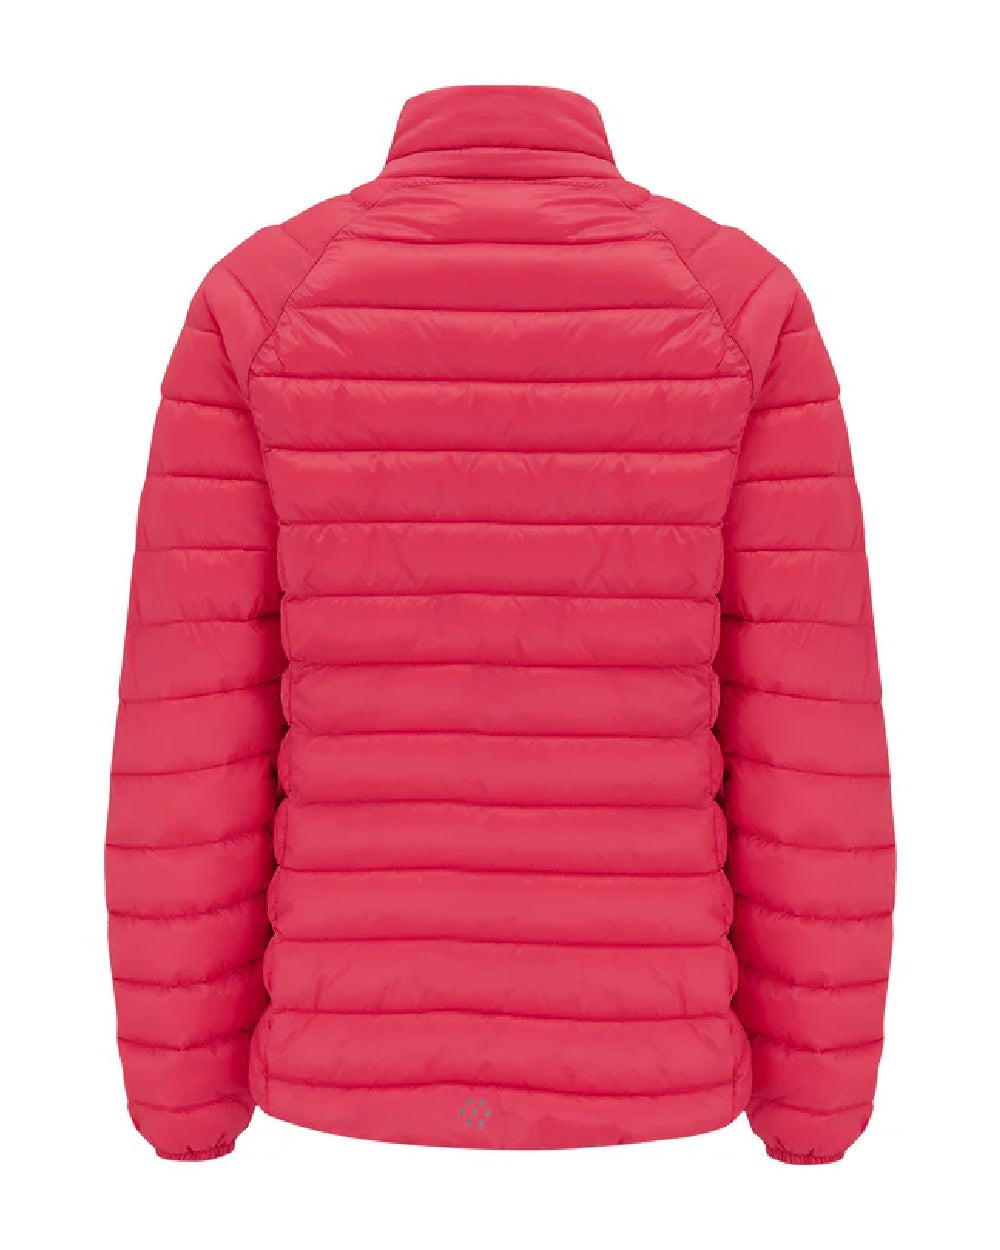 Watermelon coloured Mac In A Sac Womens Synergy Jacket on white background 